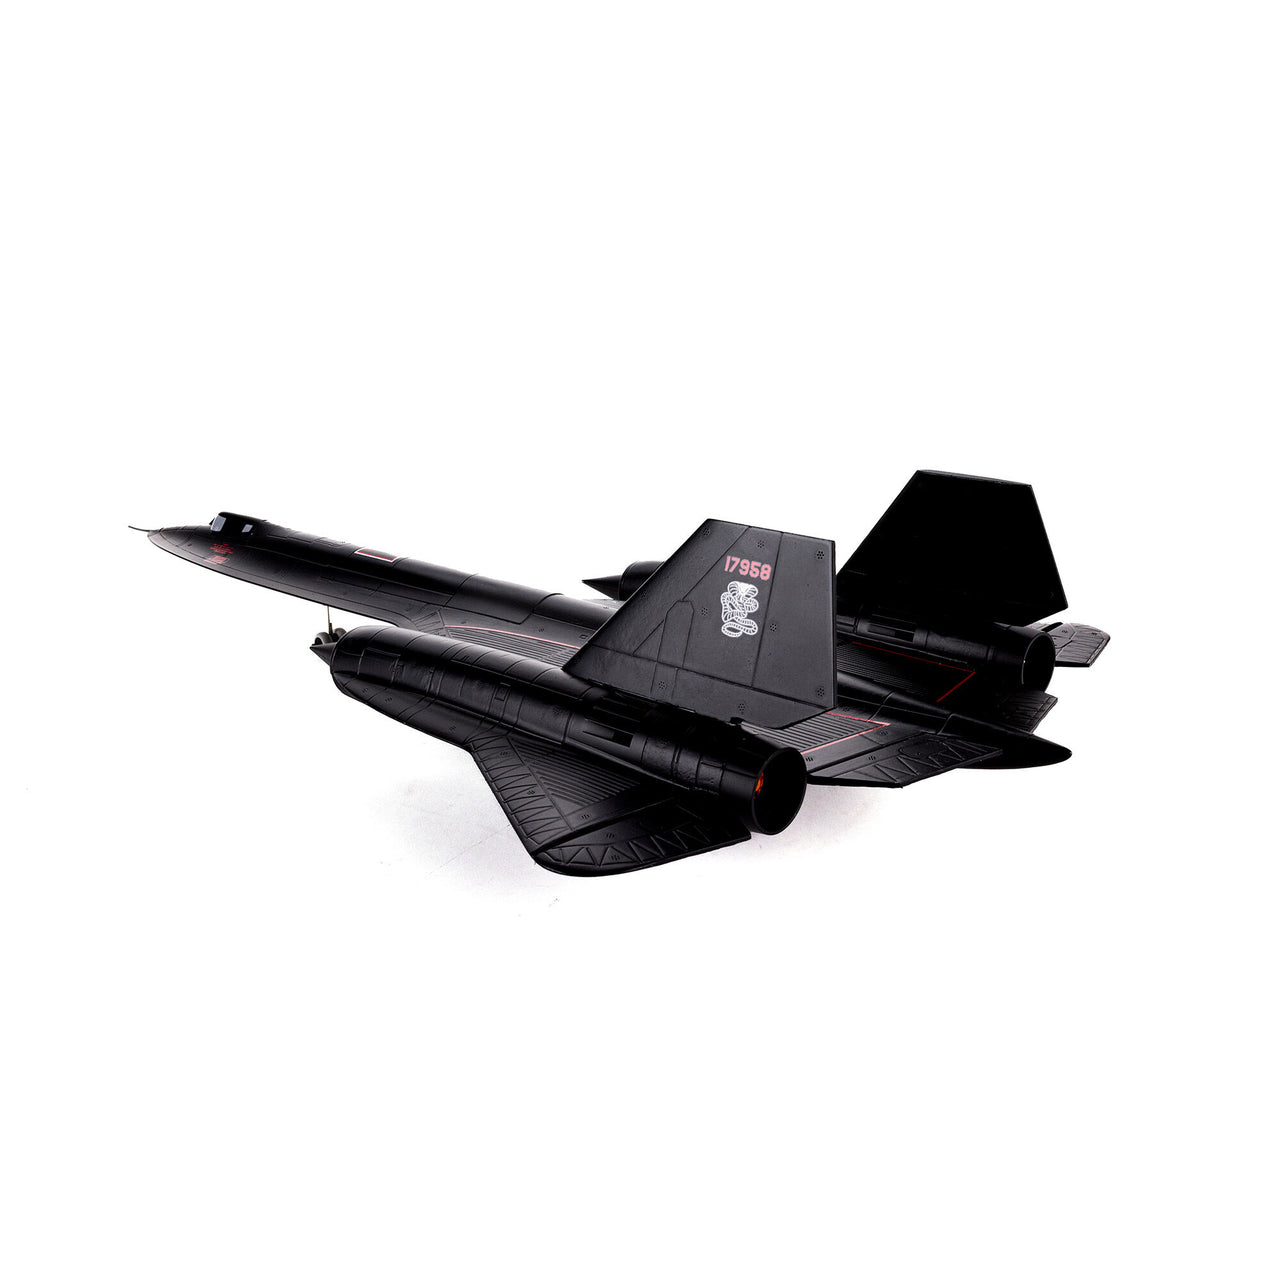 EFL02050 E-flite SR-71 Blackbird Twin 40mm EDF BNF Basic with AS3X and SAFE Select